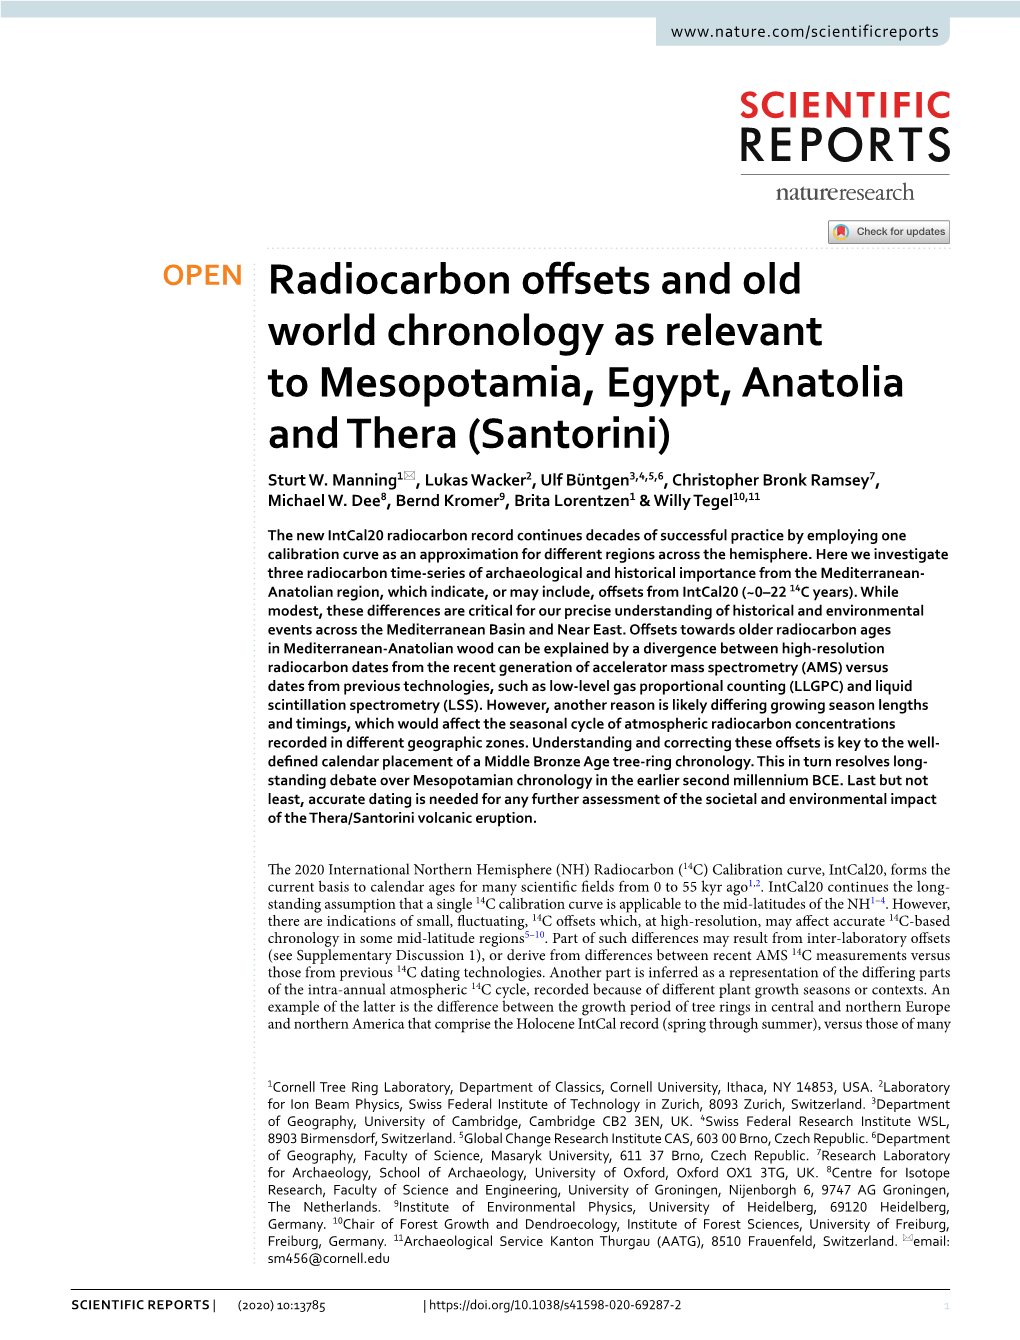 Radiocarbon Offsets and Old World Chronology As Relevant To